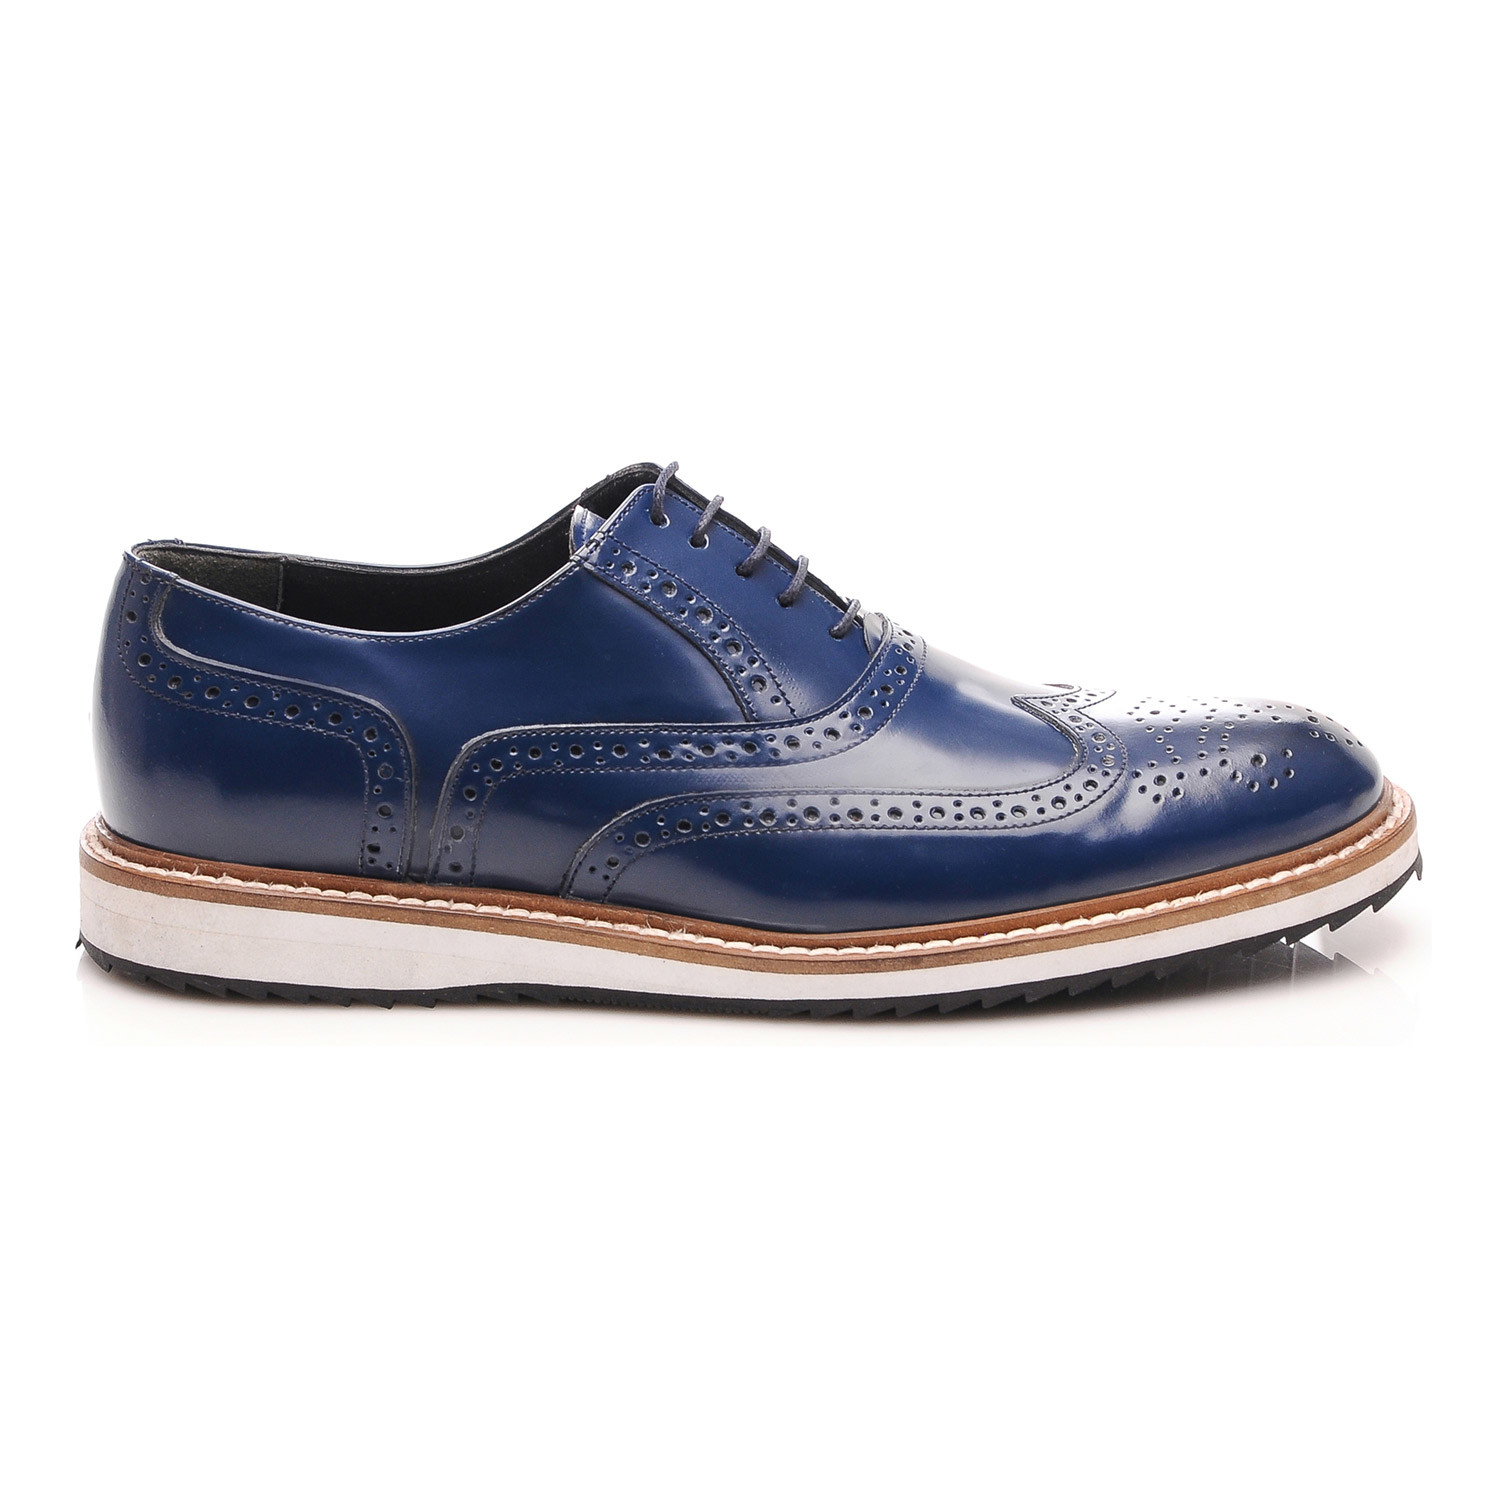 Wingtip Oxford // Light Navy Blue (Euro: 40) - Baqietto - Touch of Modern